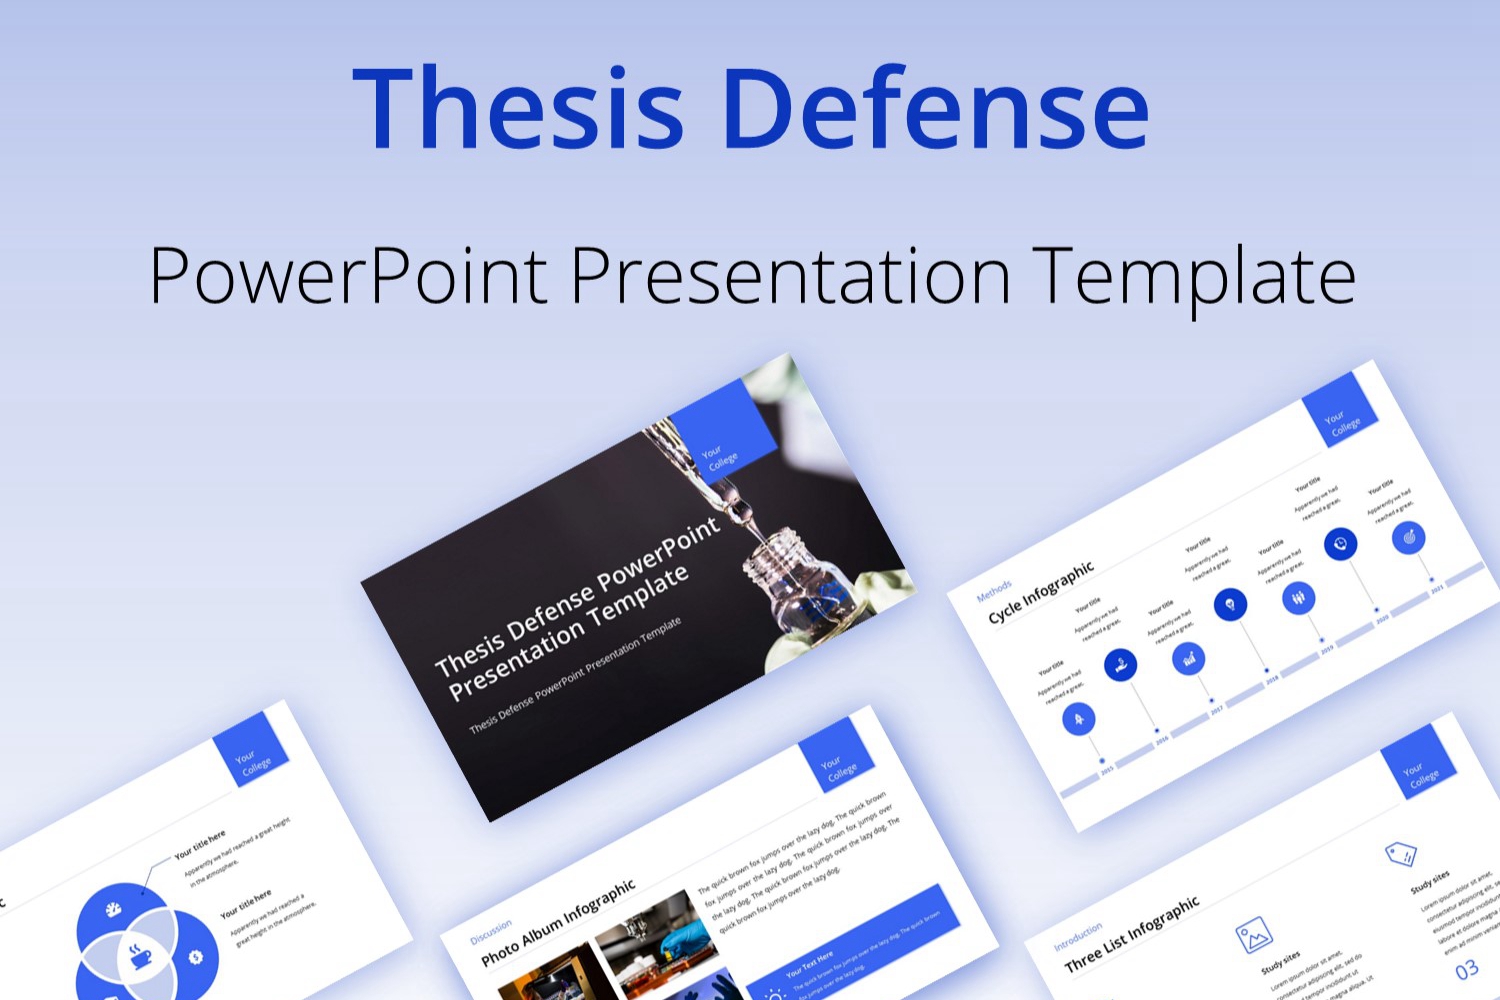 Thesis Defense PowerPoint Presentation Template